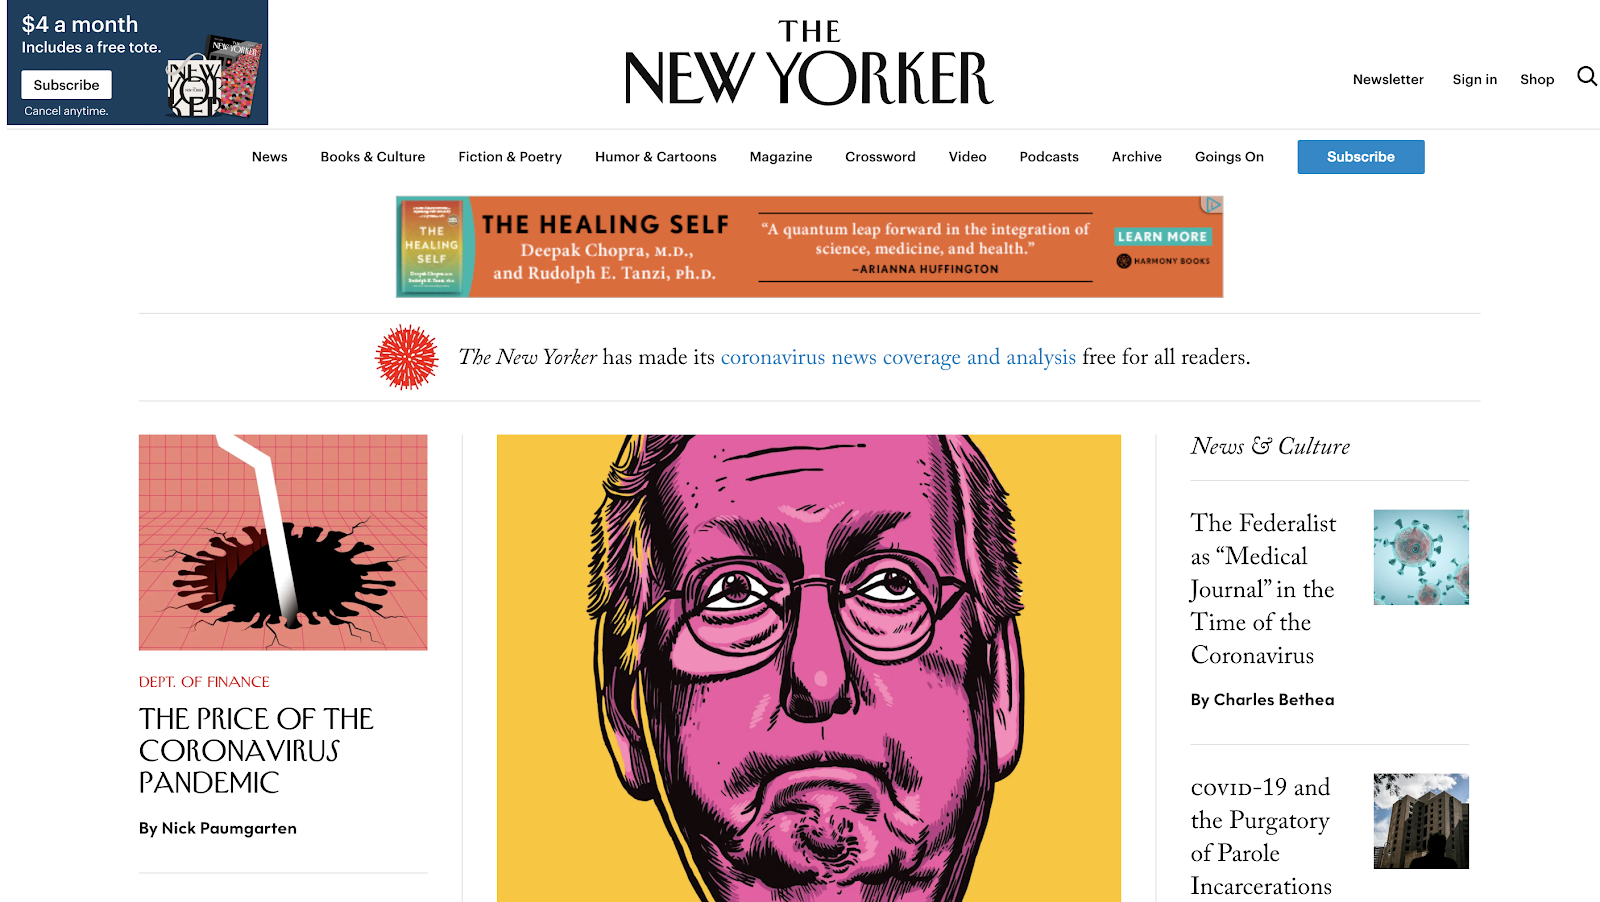 The New Yorker Homepage Screenshot (Blog Layout Examples)